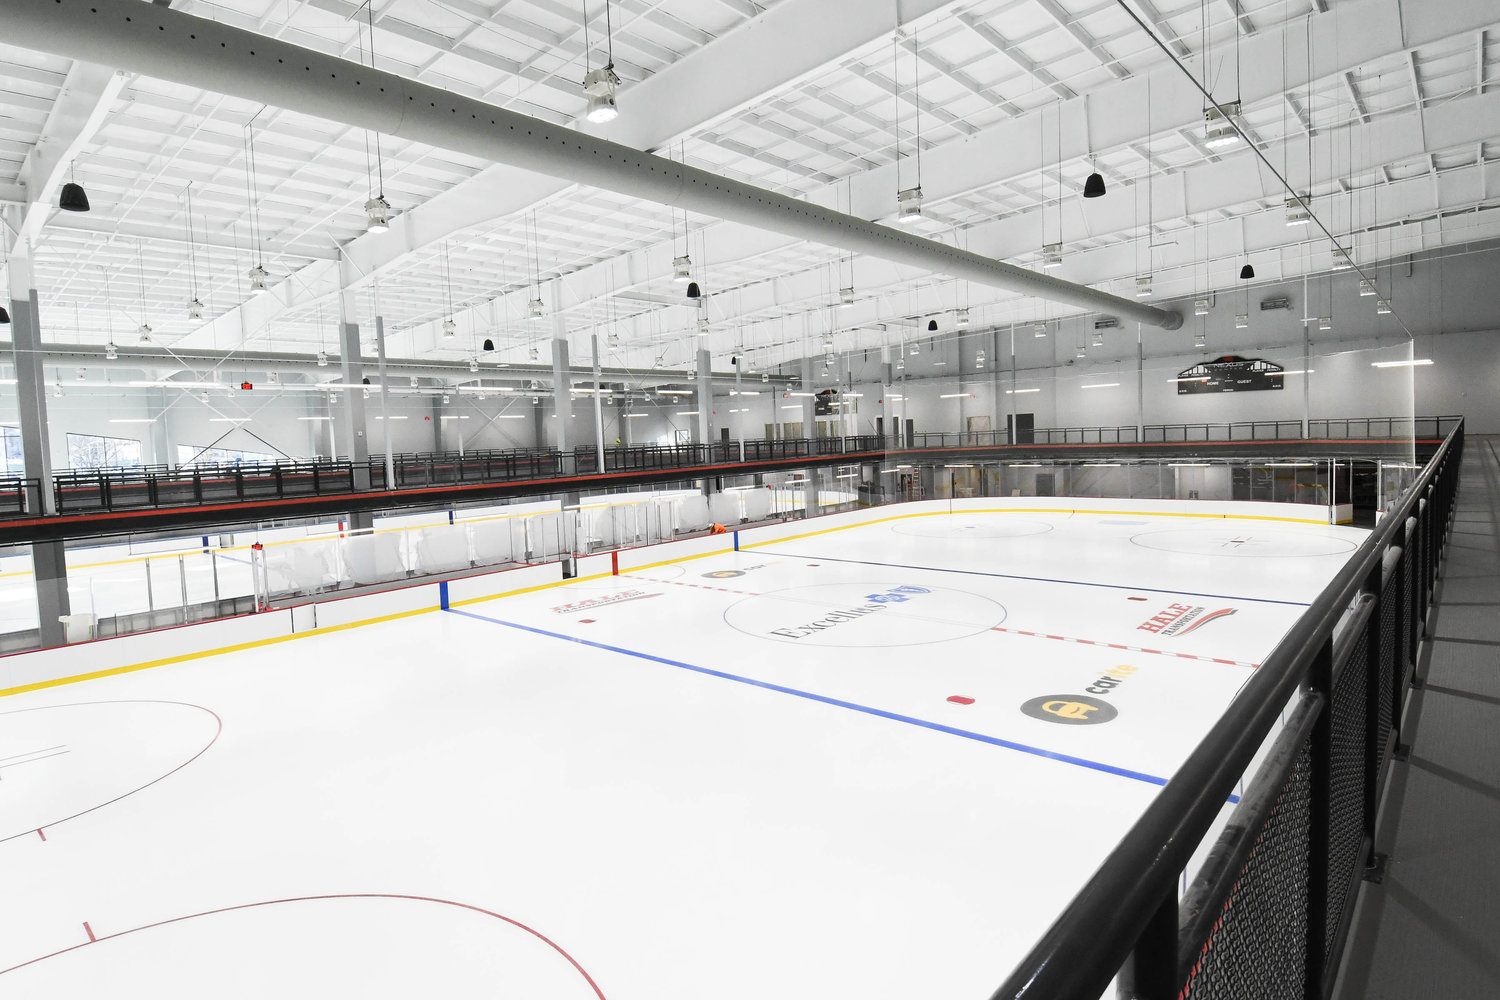 The Nexus Center is the recipient of $3,700,000 from the ARPA funding plan for the development of the Nexus Center parking lot and to finish the third floor. Pictured above is an ice rink in the Nexus Center which held its first hockey tournament on Nov. 11.